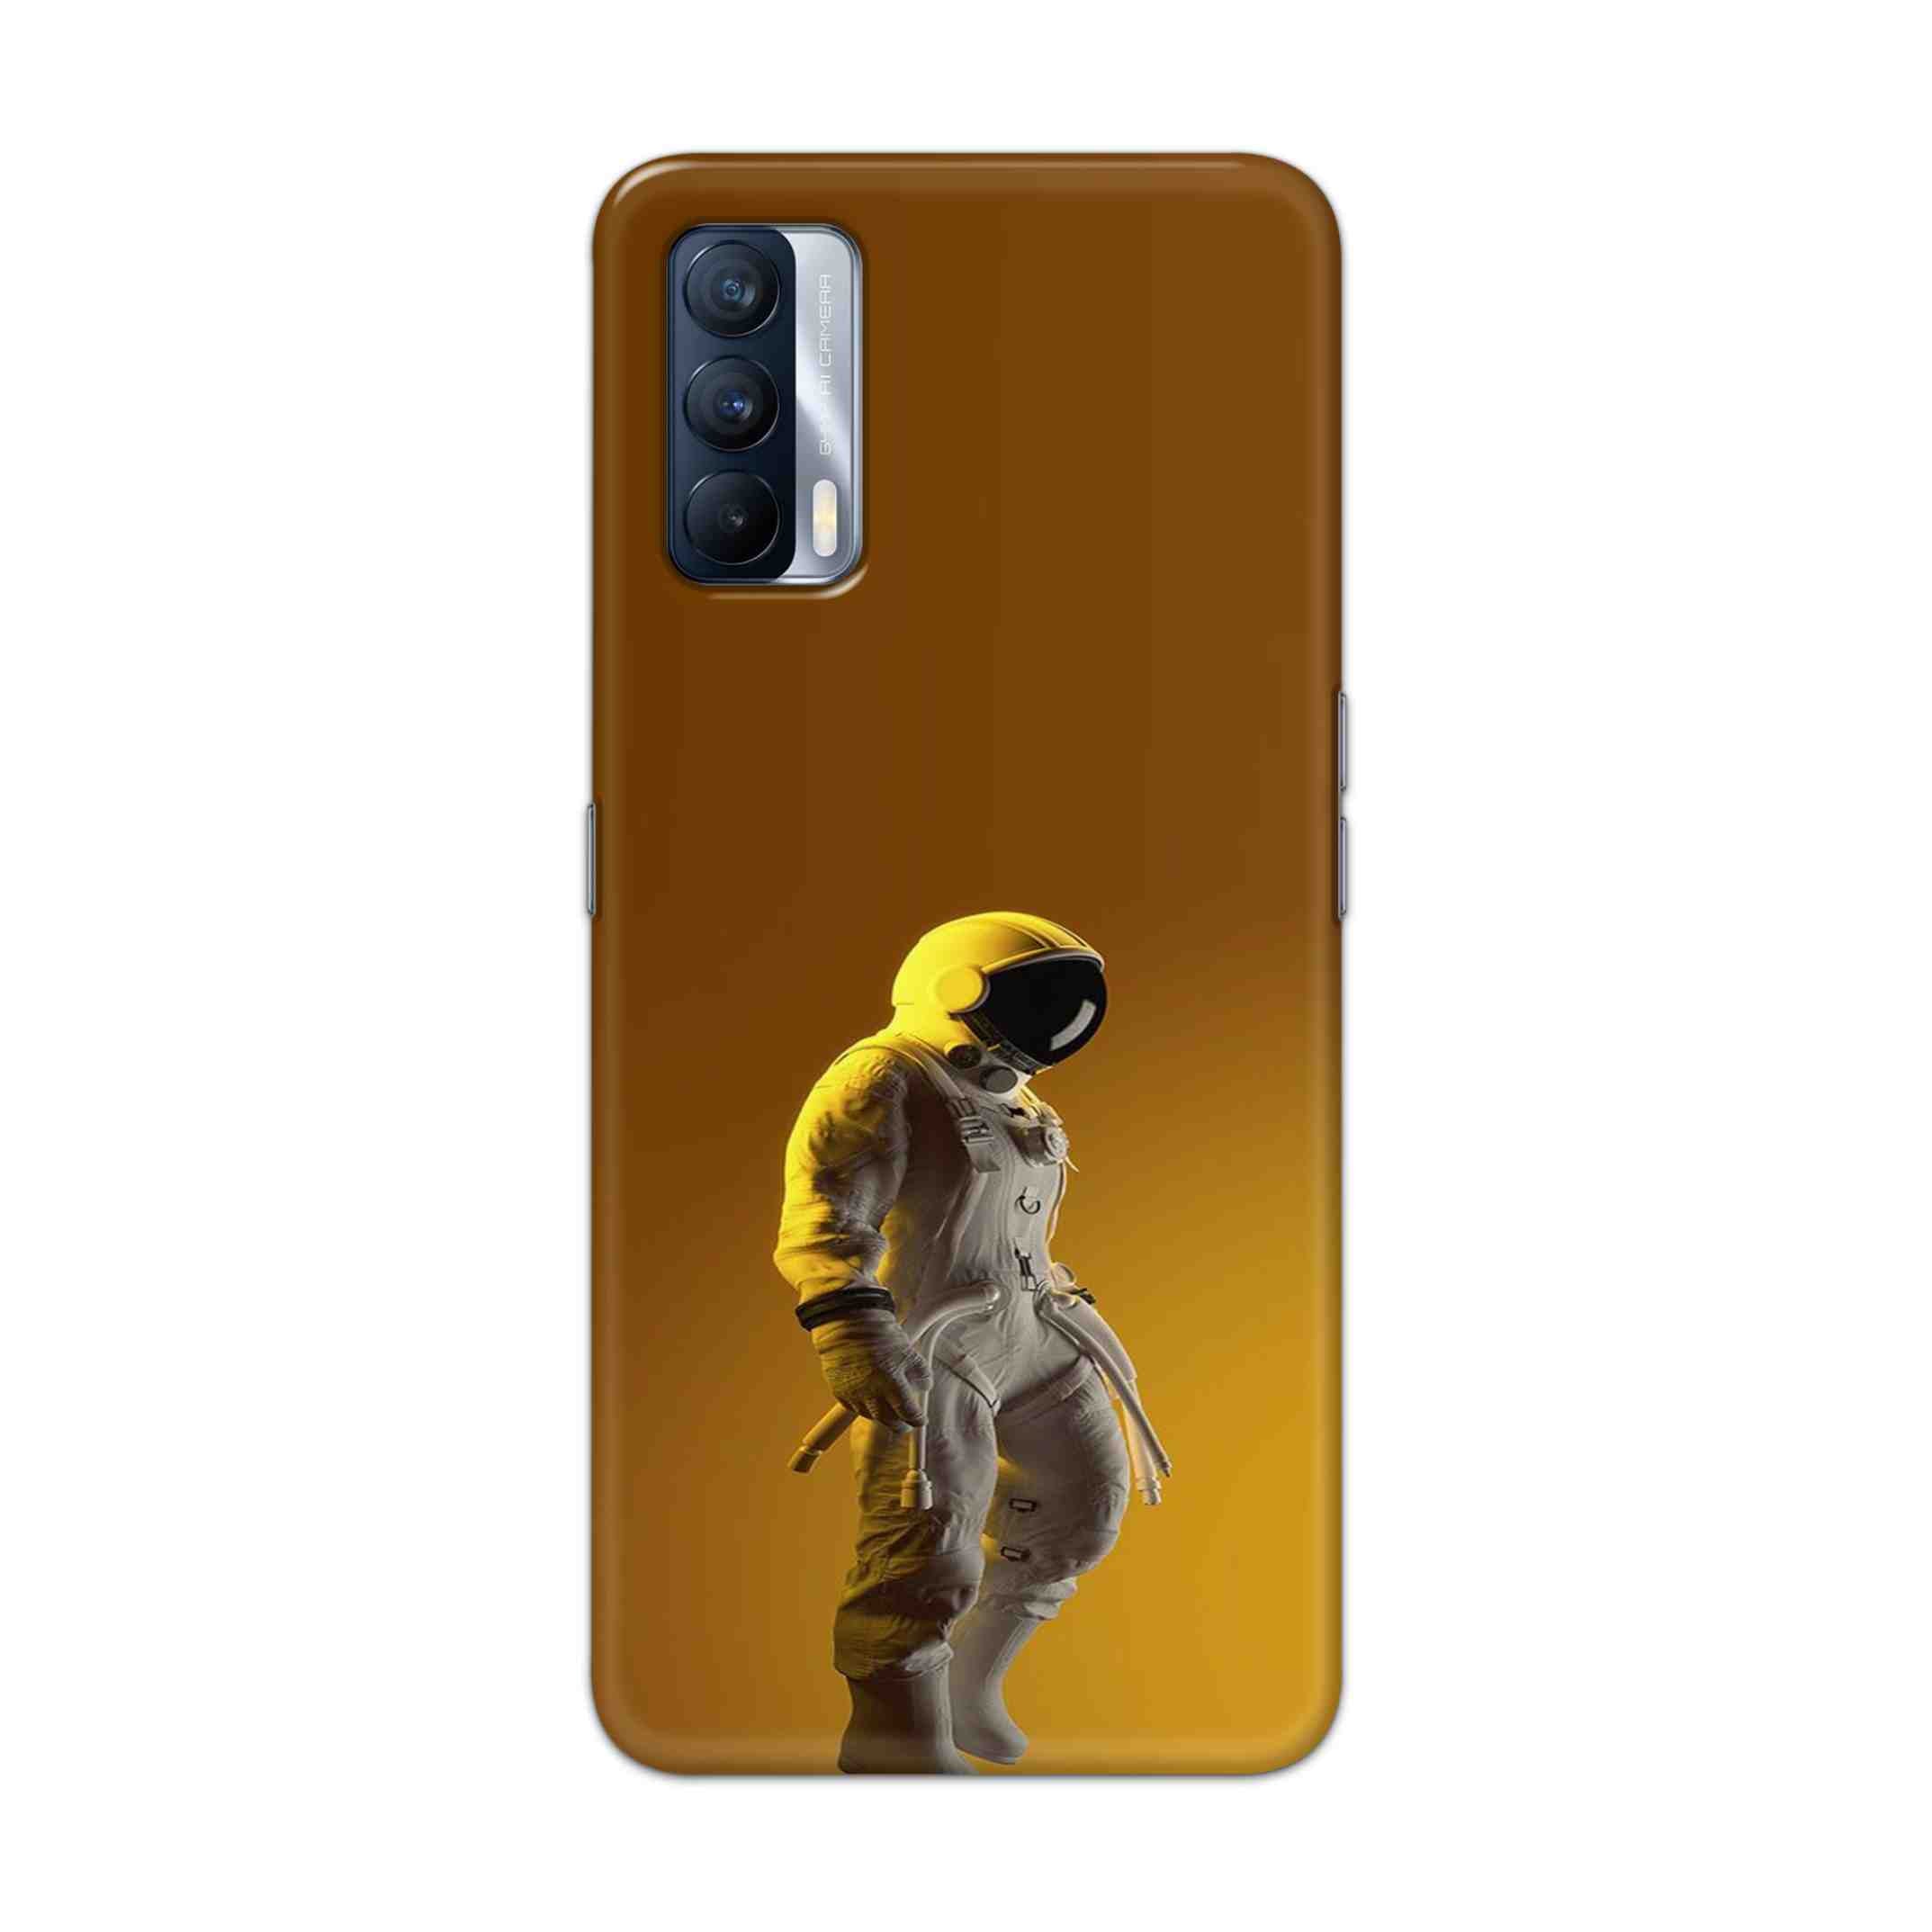 Buy Yellow Astronaut Hard Back Mobile Phone Case Cover For Realme X7 Online